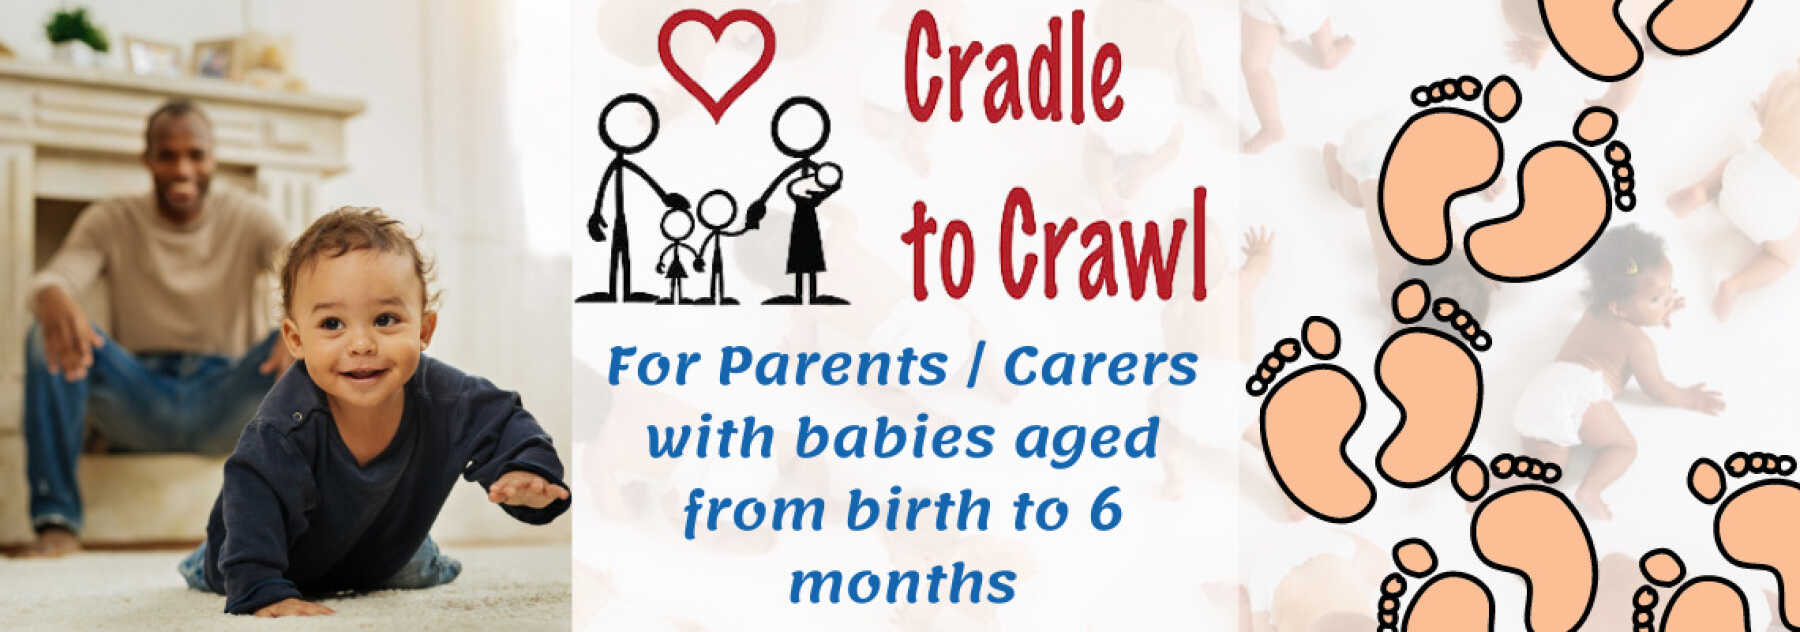 Featured Image for Cradle to Crawl